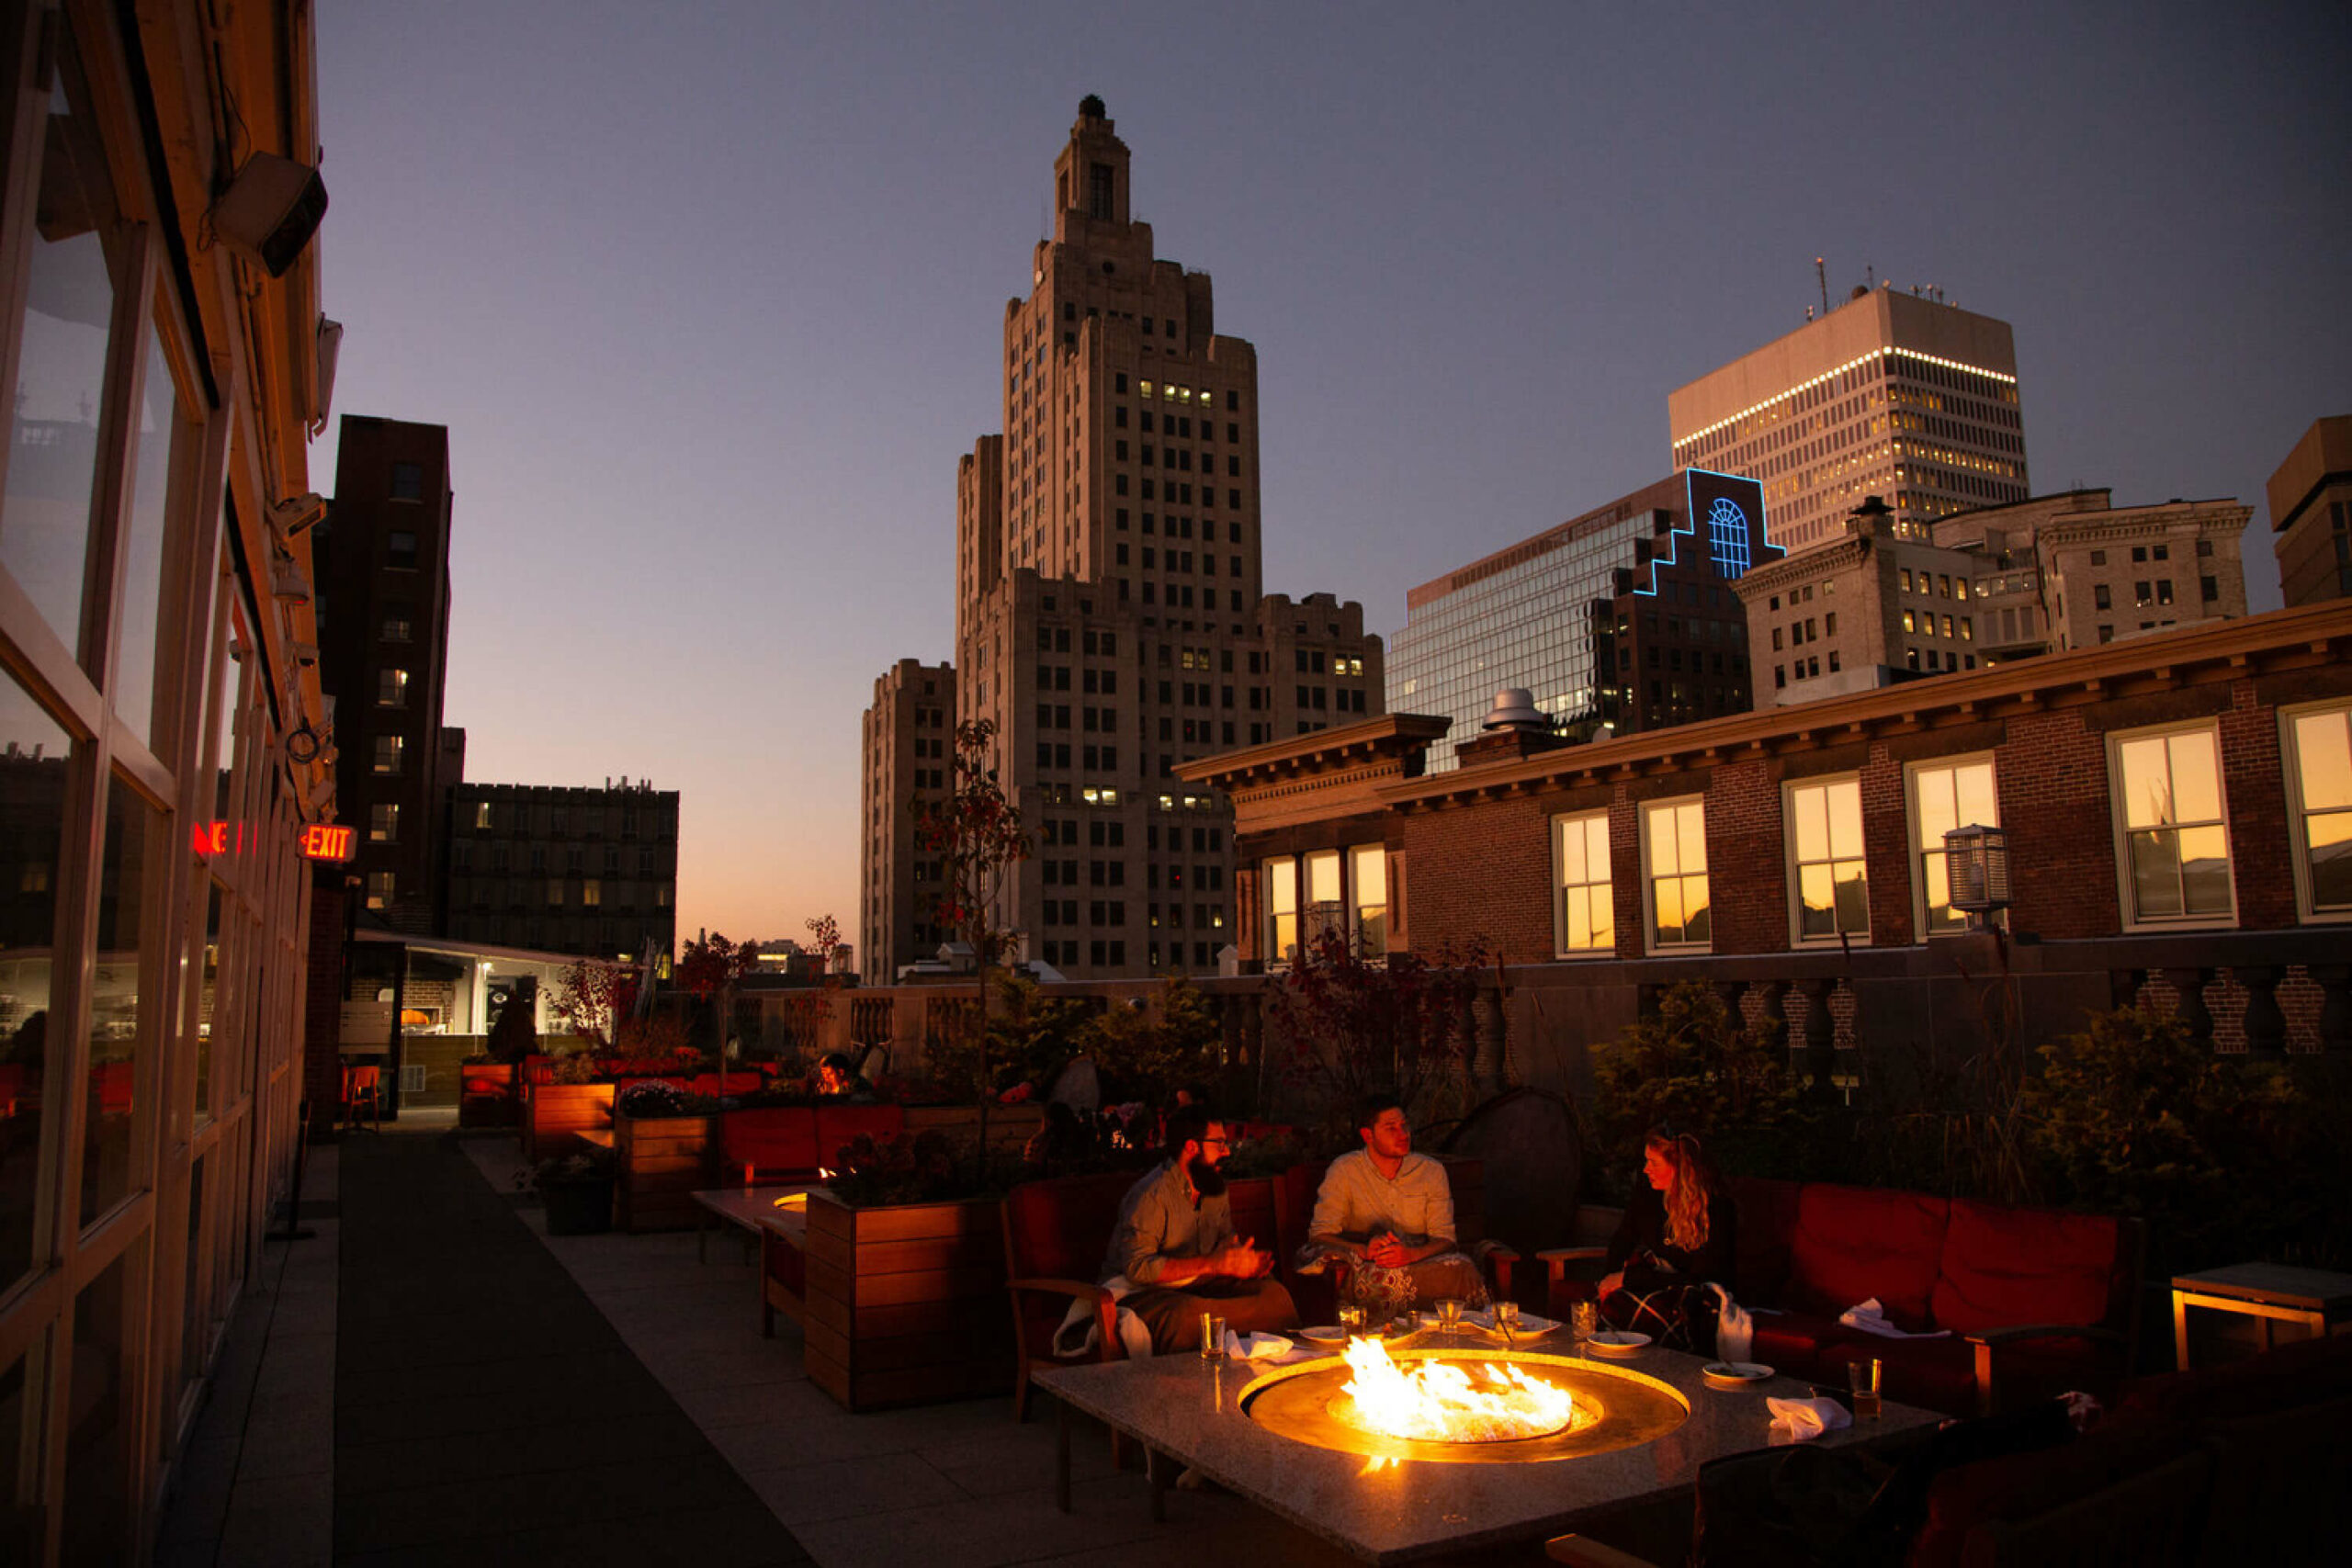 Guests enjoy drinks by the firepit while socializing with a view of the Providence skyline behind them.